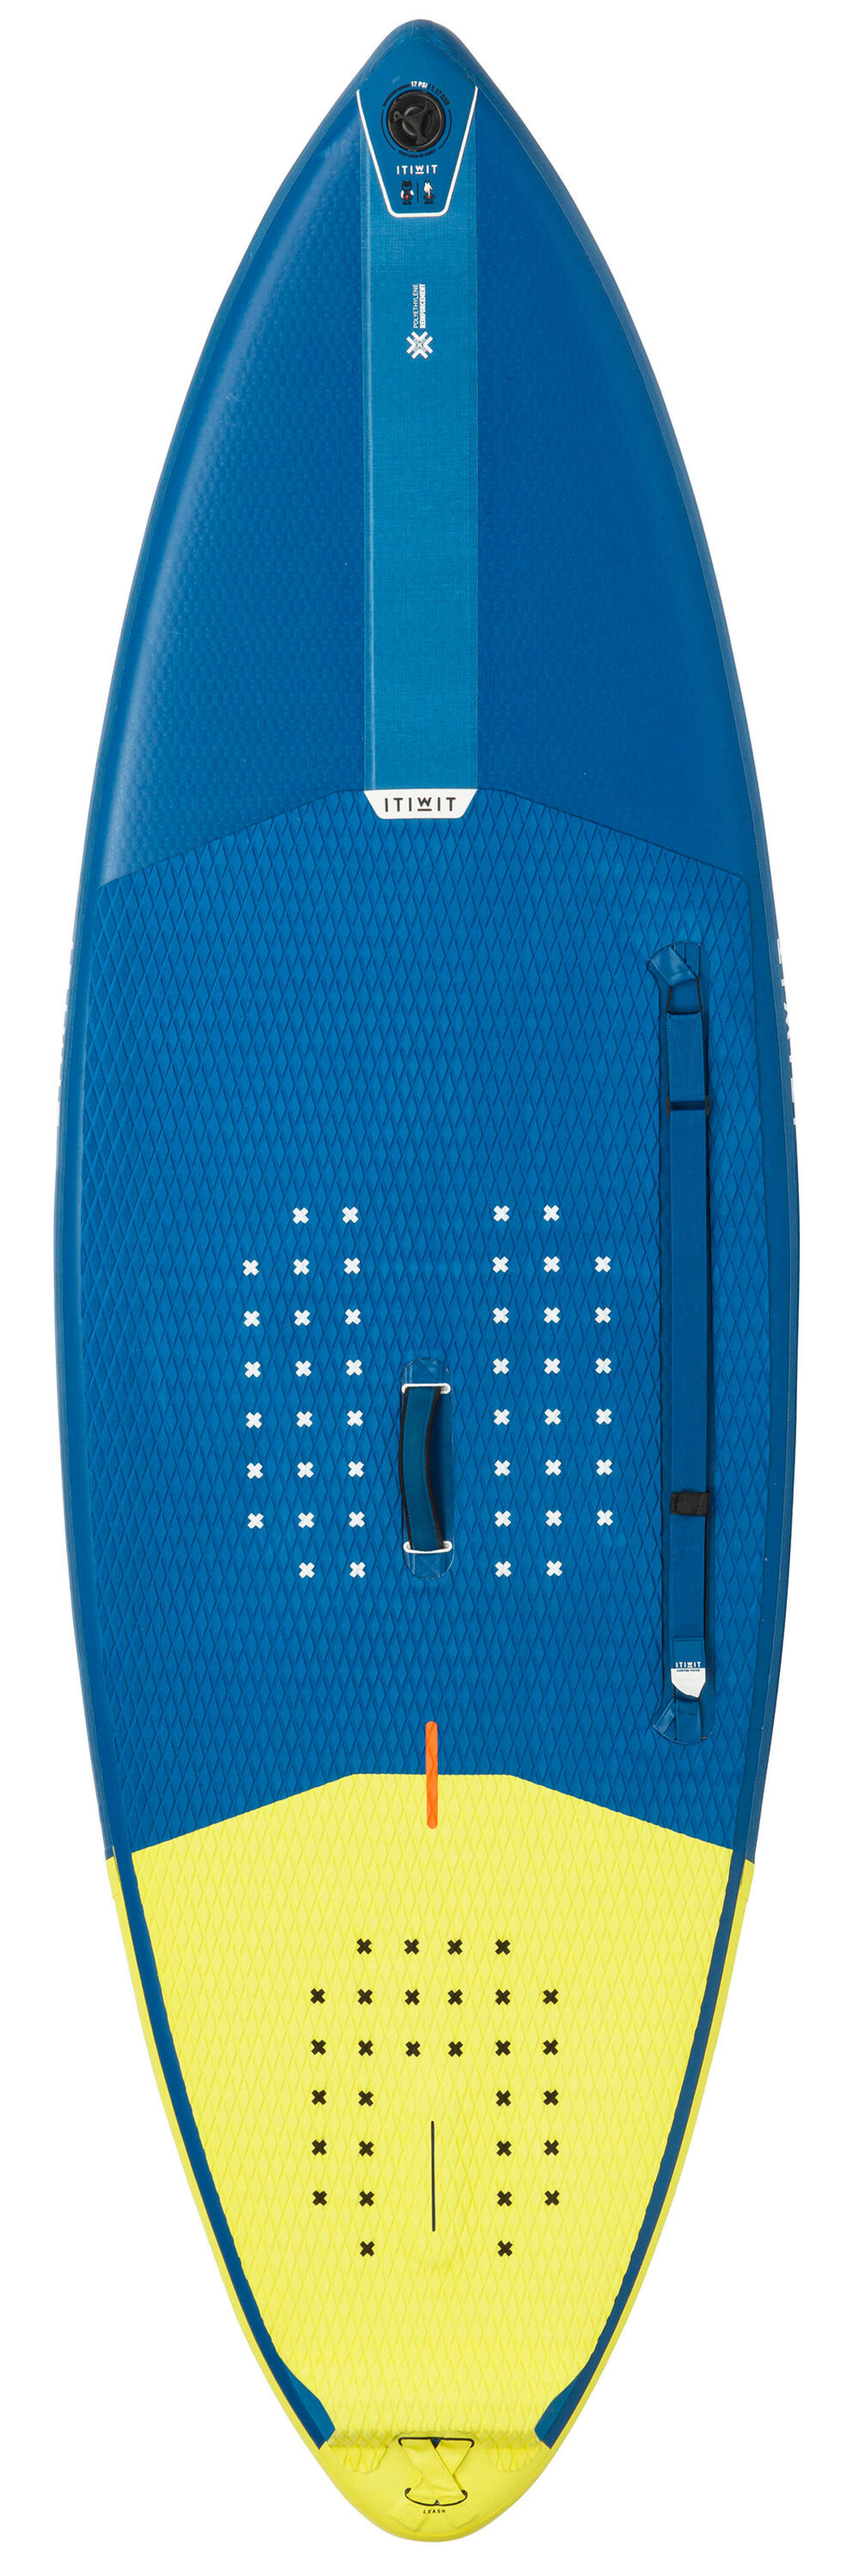 itiwit-inflatable-surf-sup-w500-9-blue